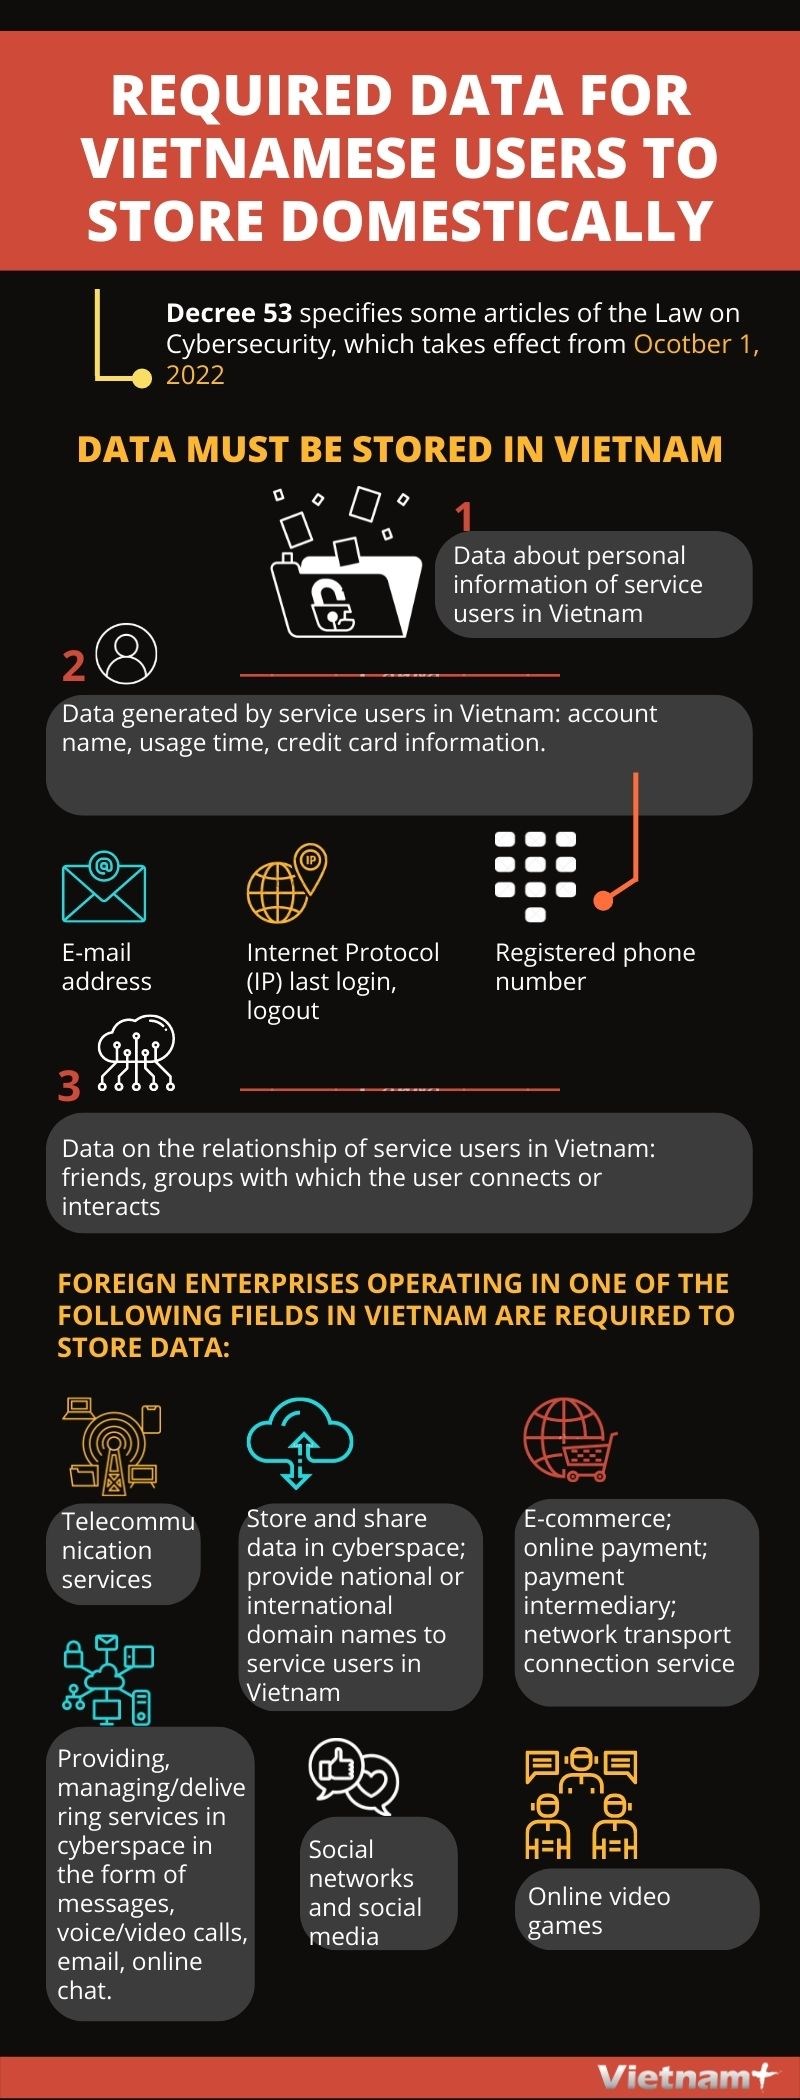 Required data for Vietnamese users to store domestically hinh anh 1